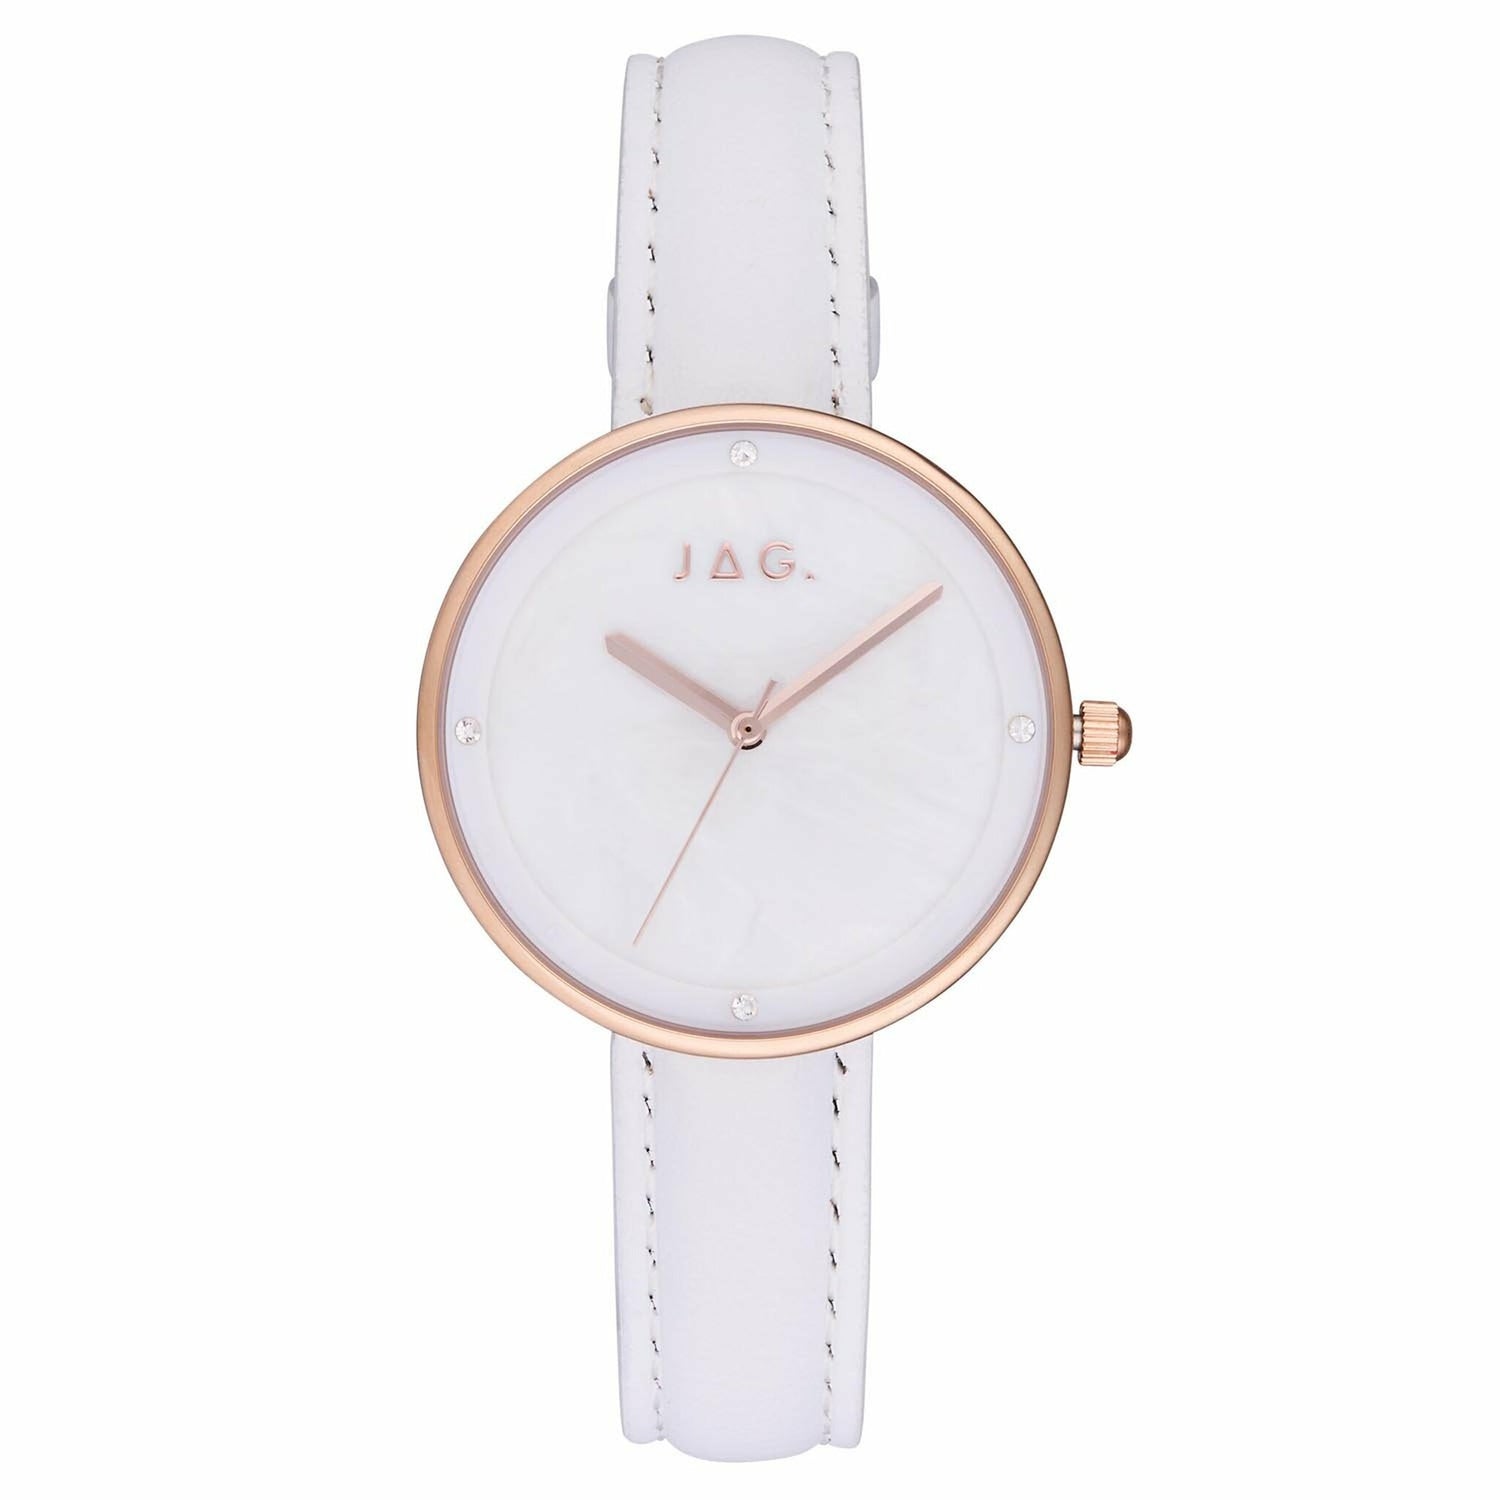 Jag Sarah White and Rose Gold Women's Watch J2456 Jag Bevilles 